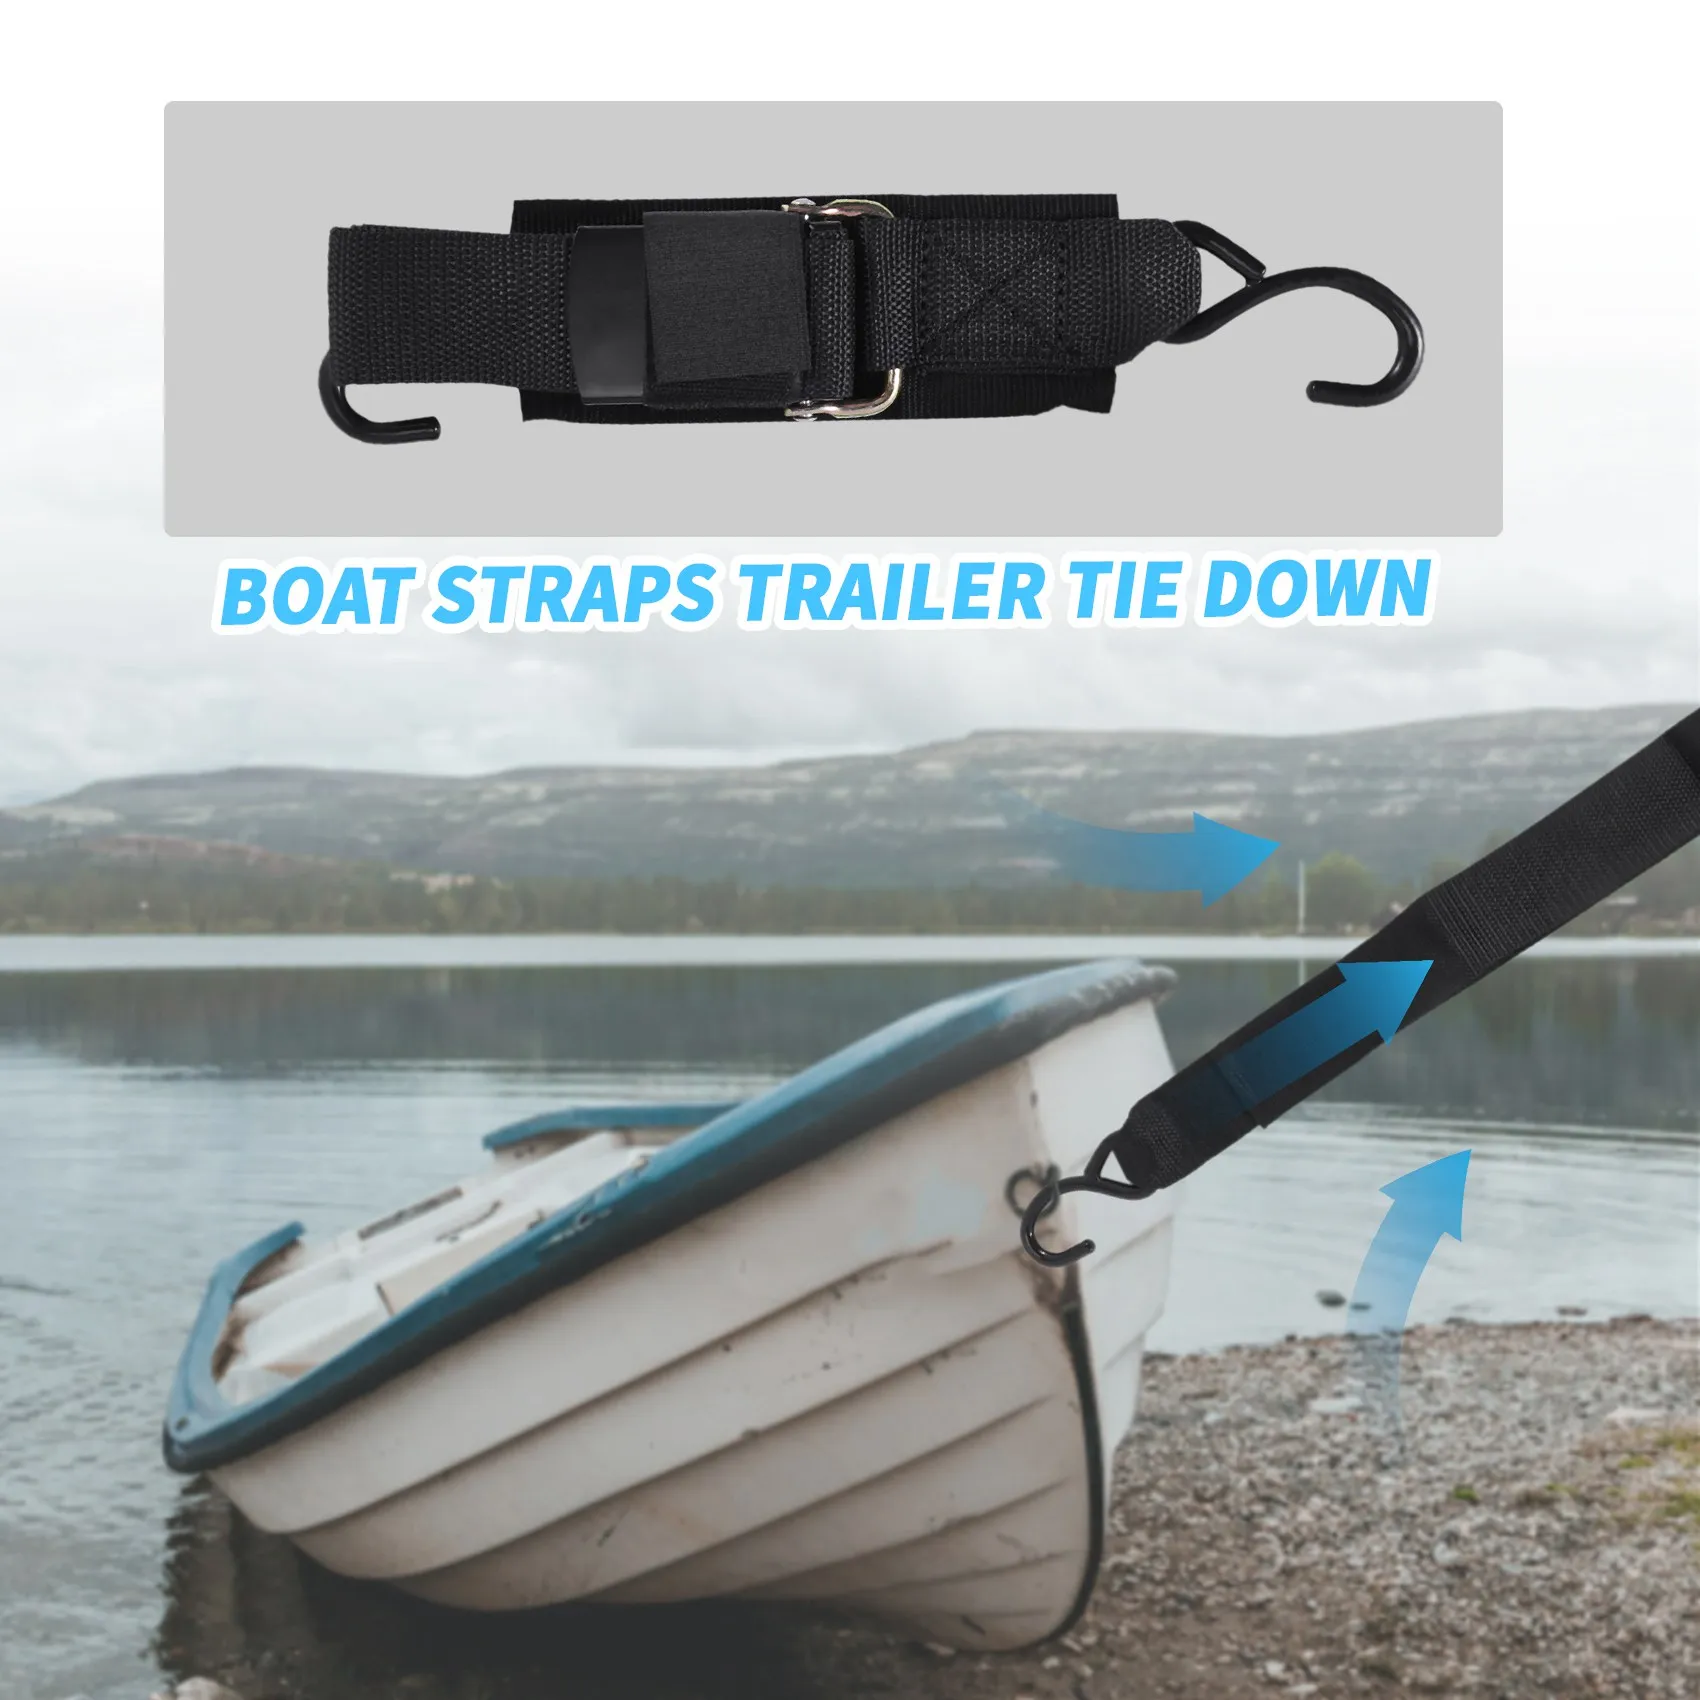 

Boat Transom Tie Down Straps to Trailer Buckle Strap for Marine Jet Ski PWC Trailers 2Inch X 4Feet,1200 LBS Capacity